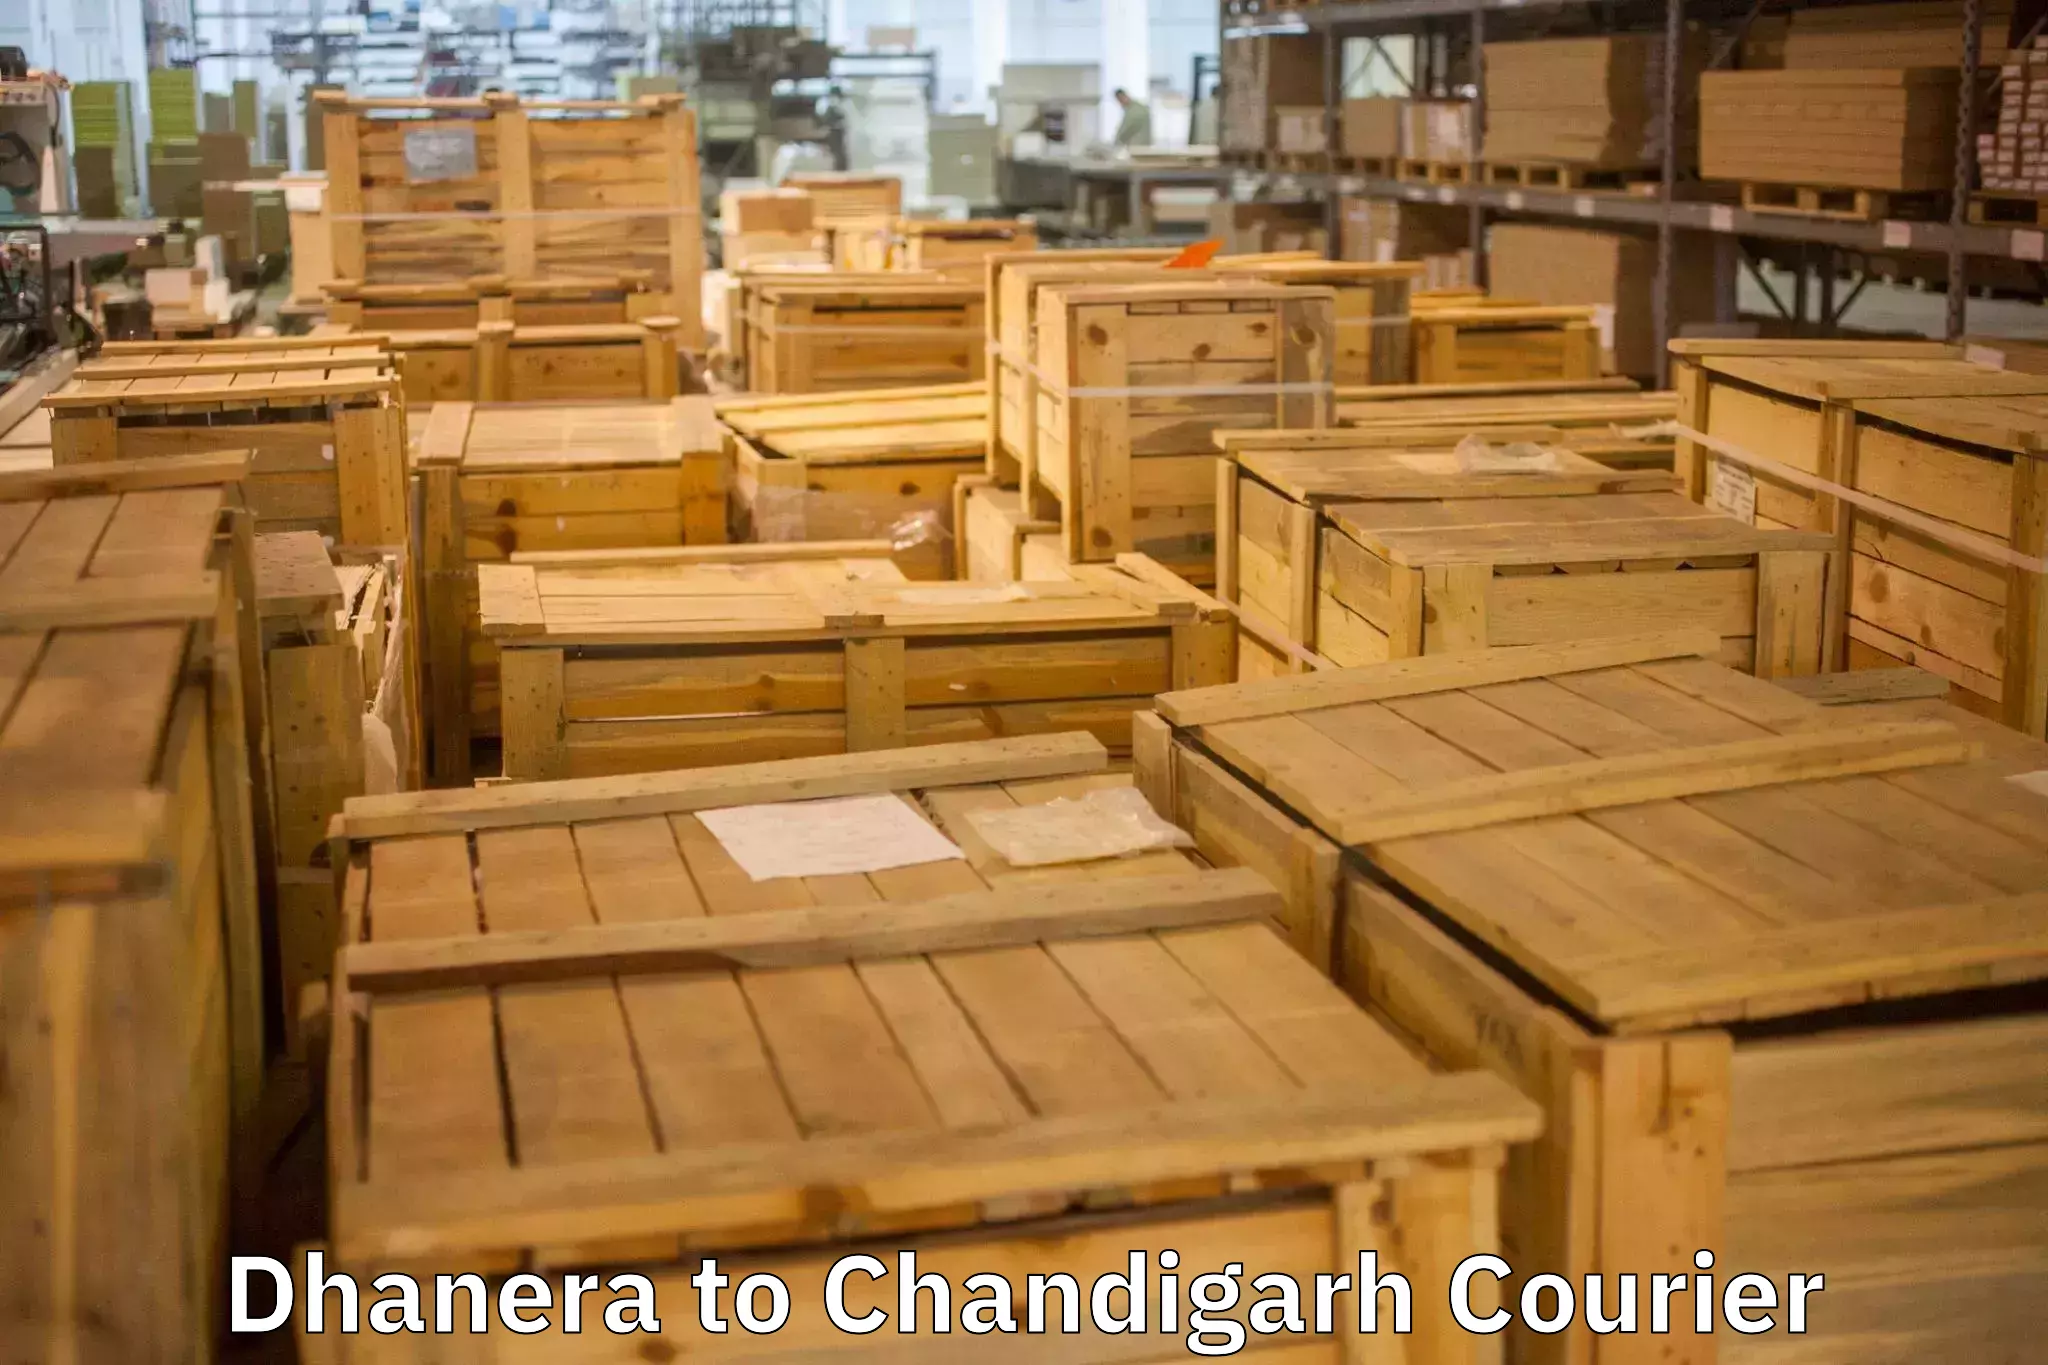 Professional relocation services Dhanera to Chandigarh